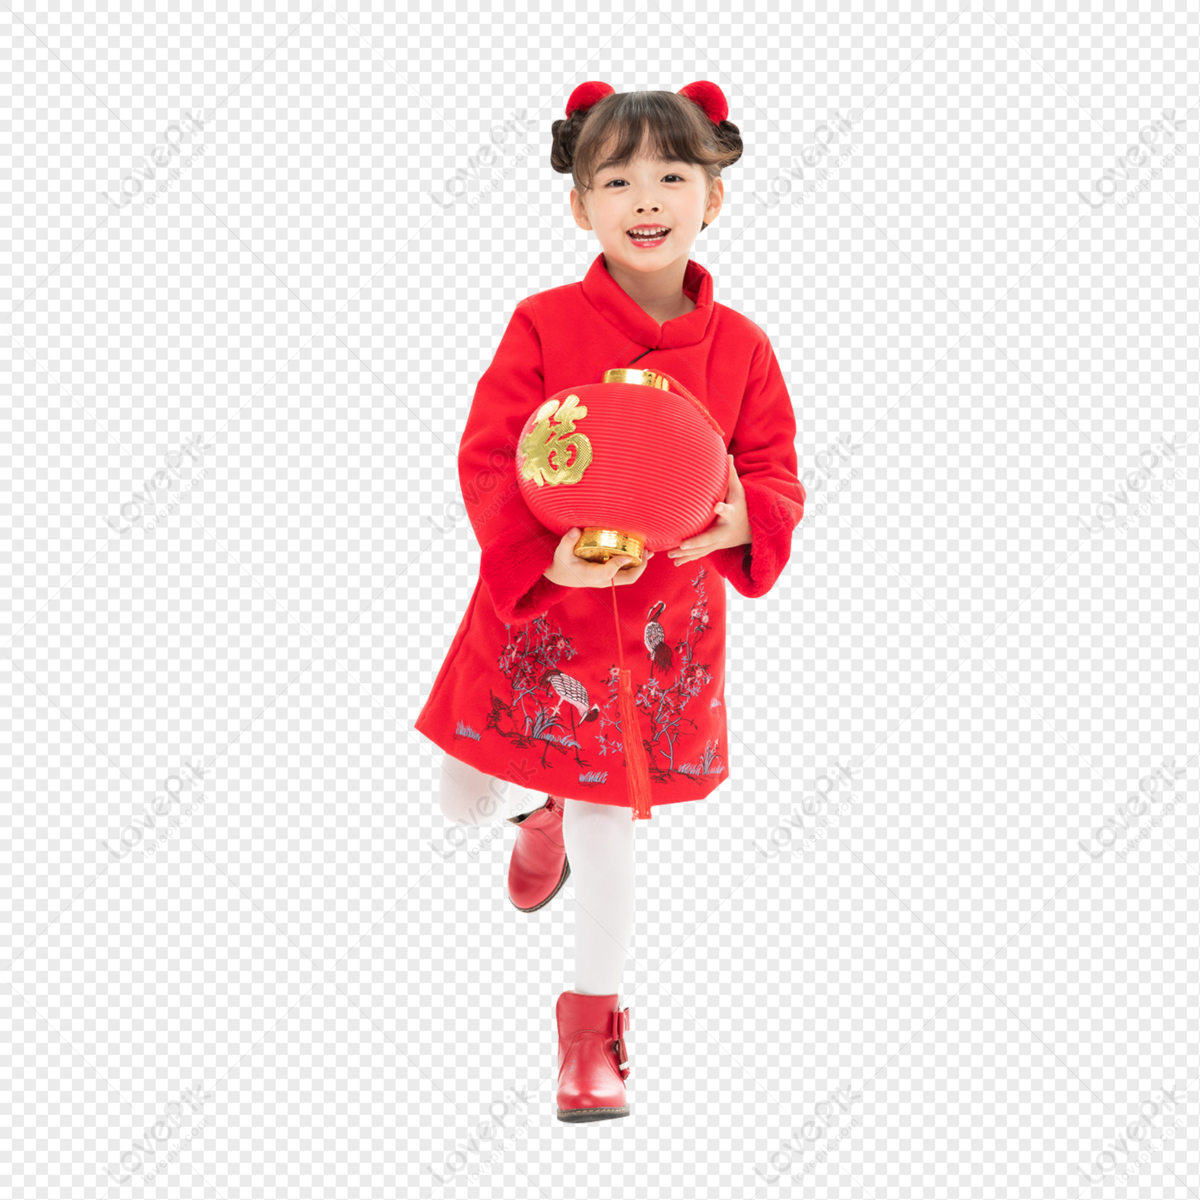 Girl New Year Handcuffs PNG Transparent And Clipart Image For Free ...